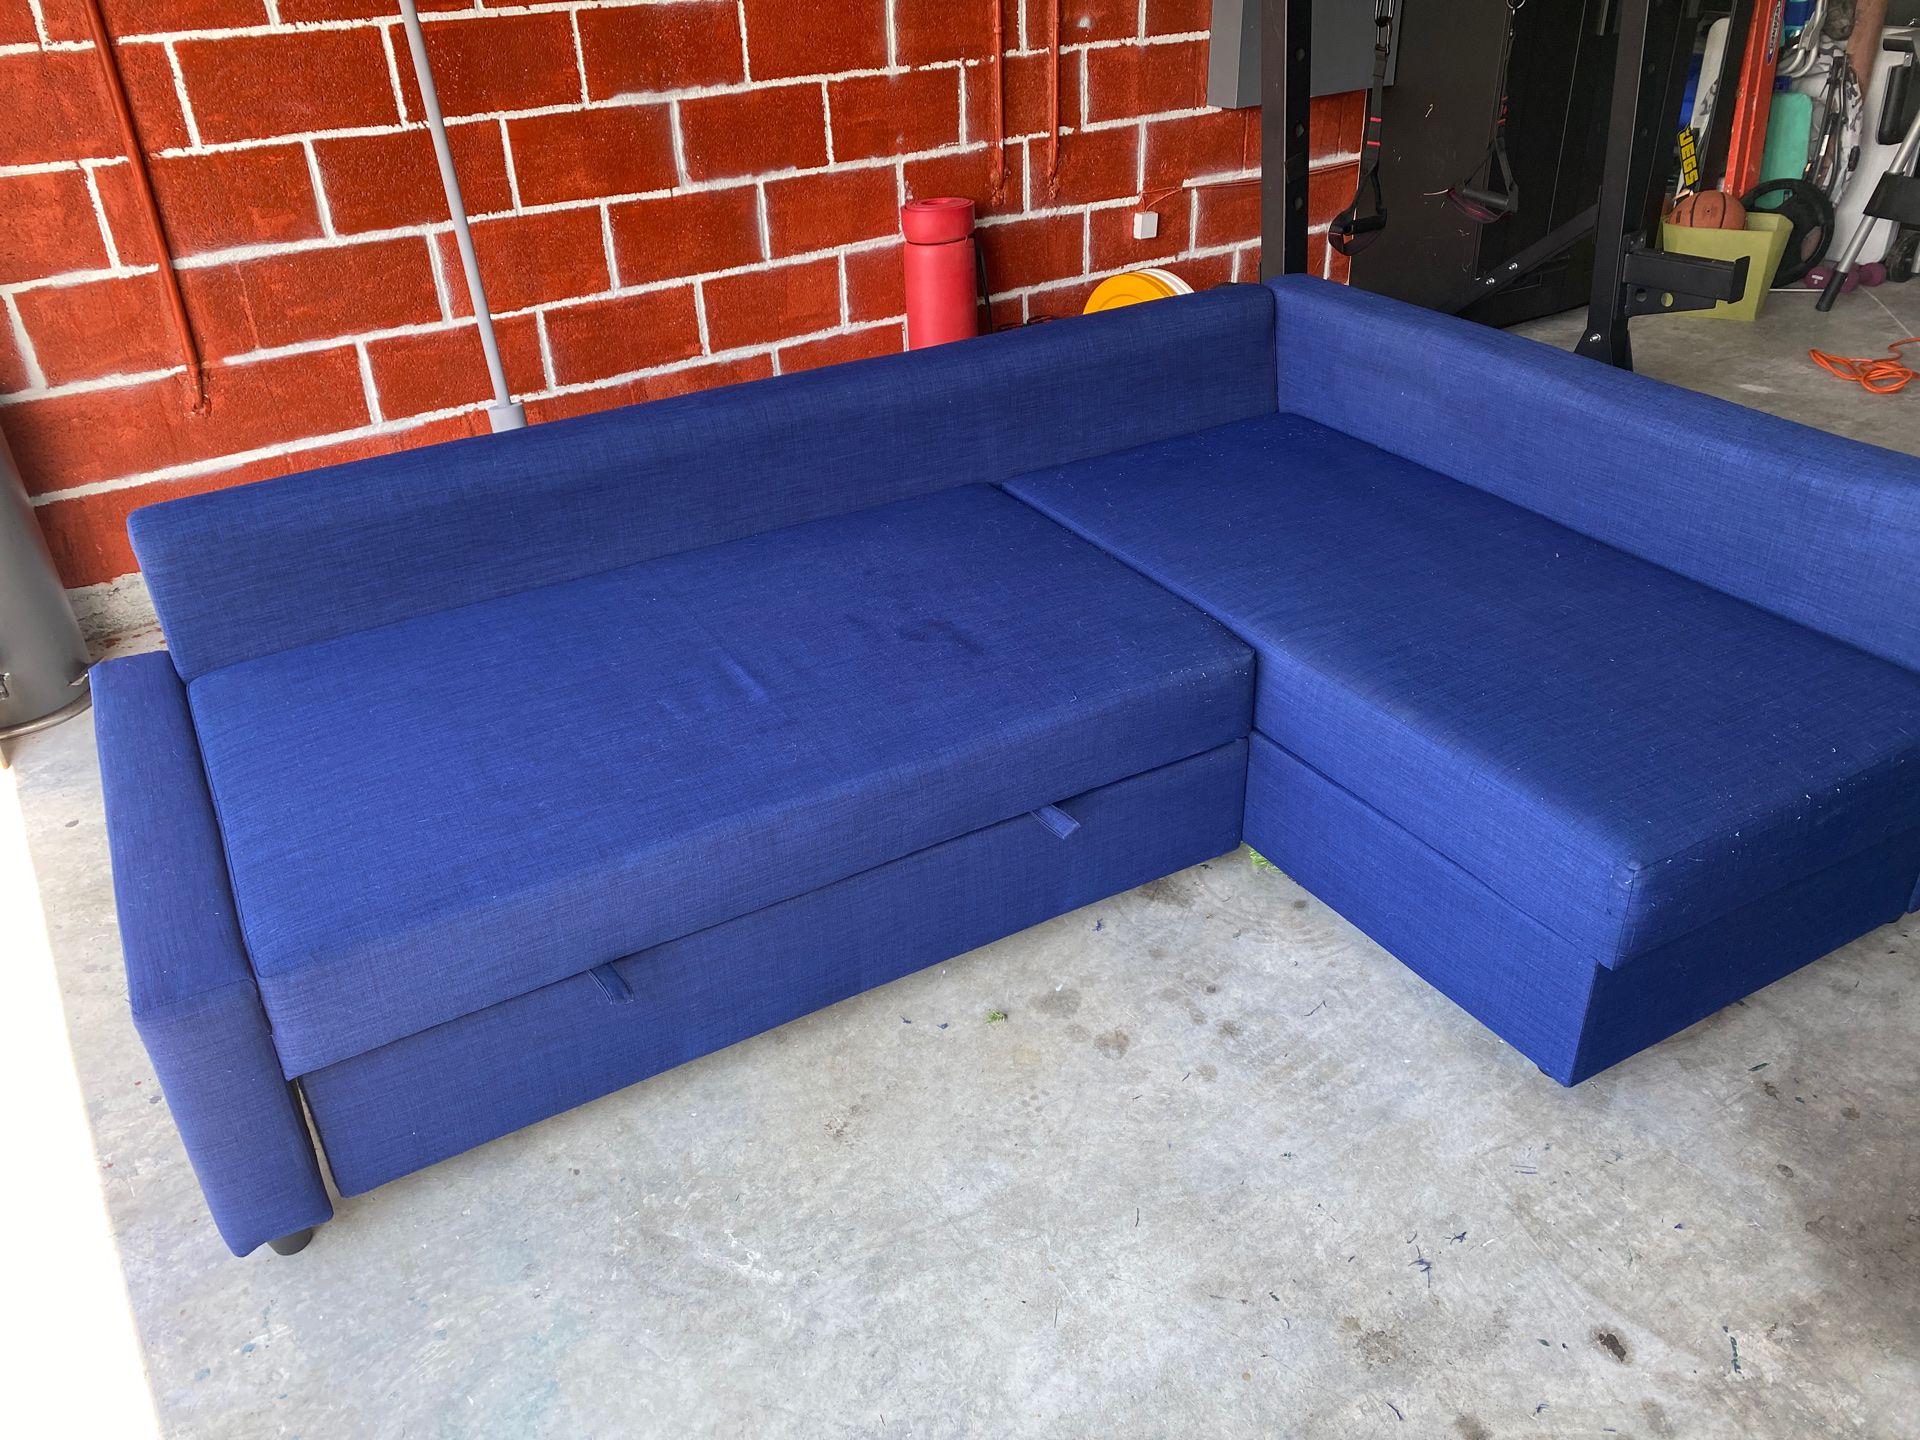 IKEA sectional sofa and pull out bed